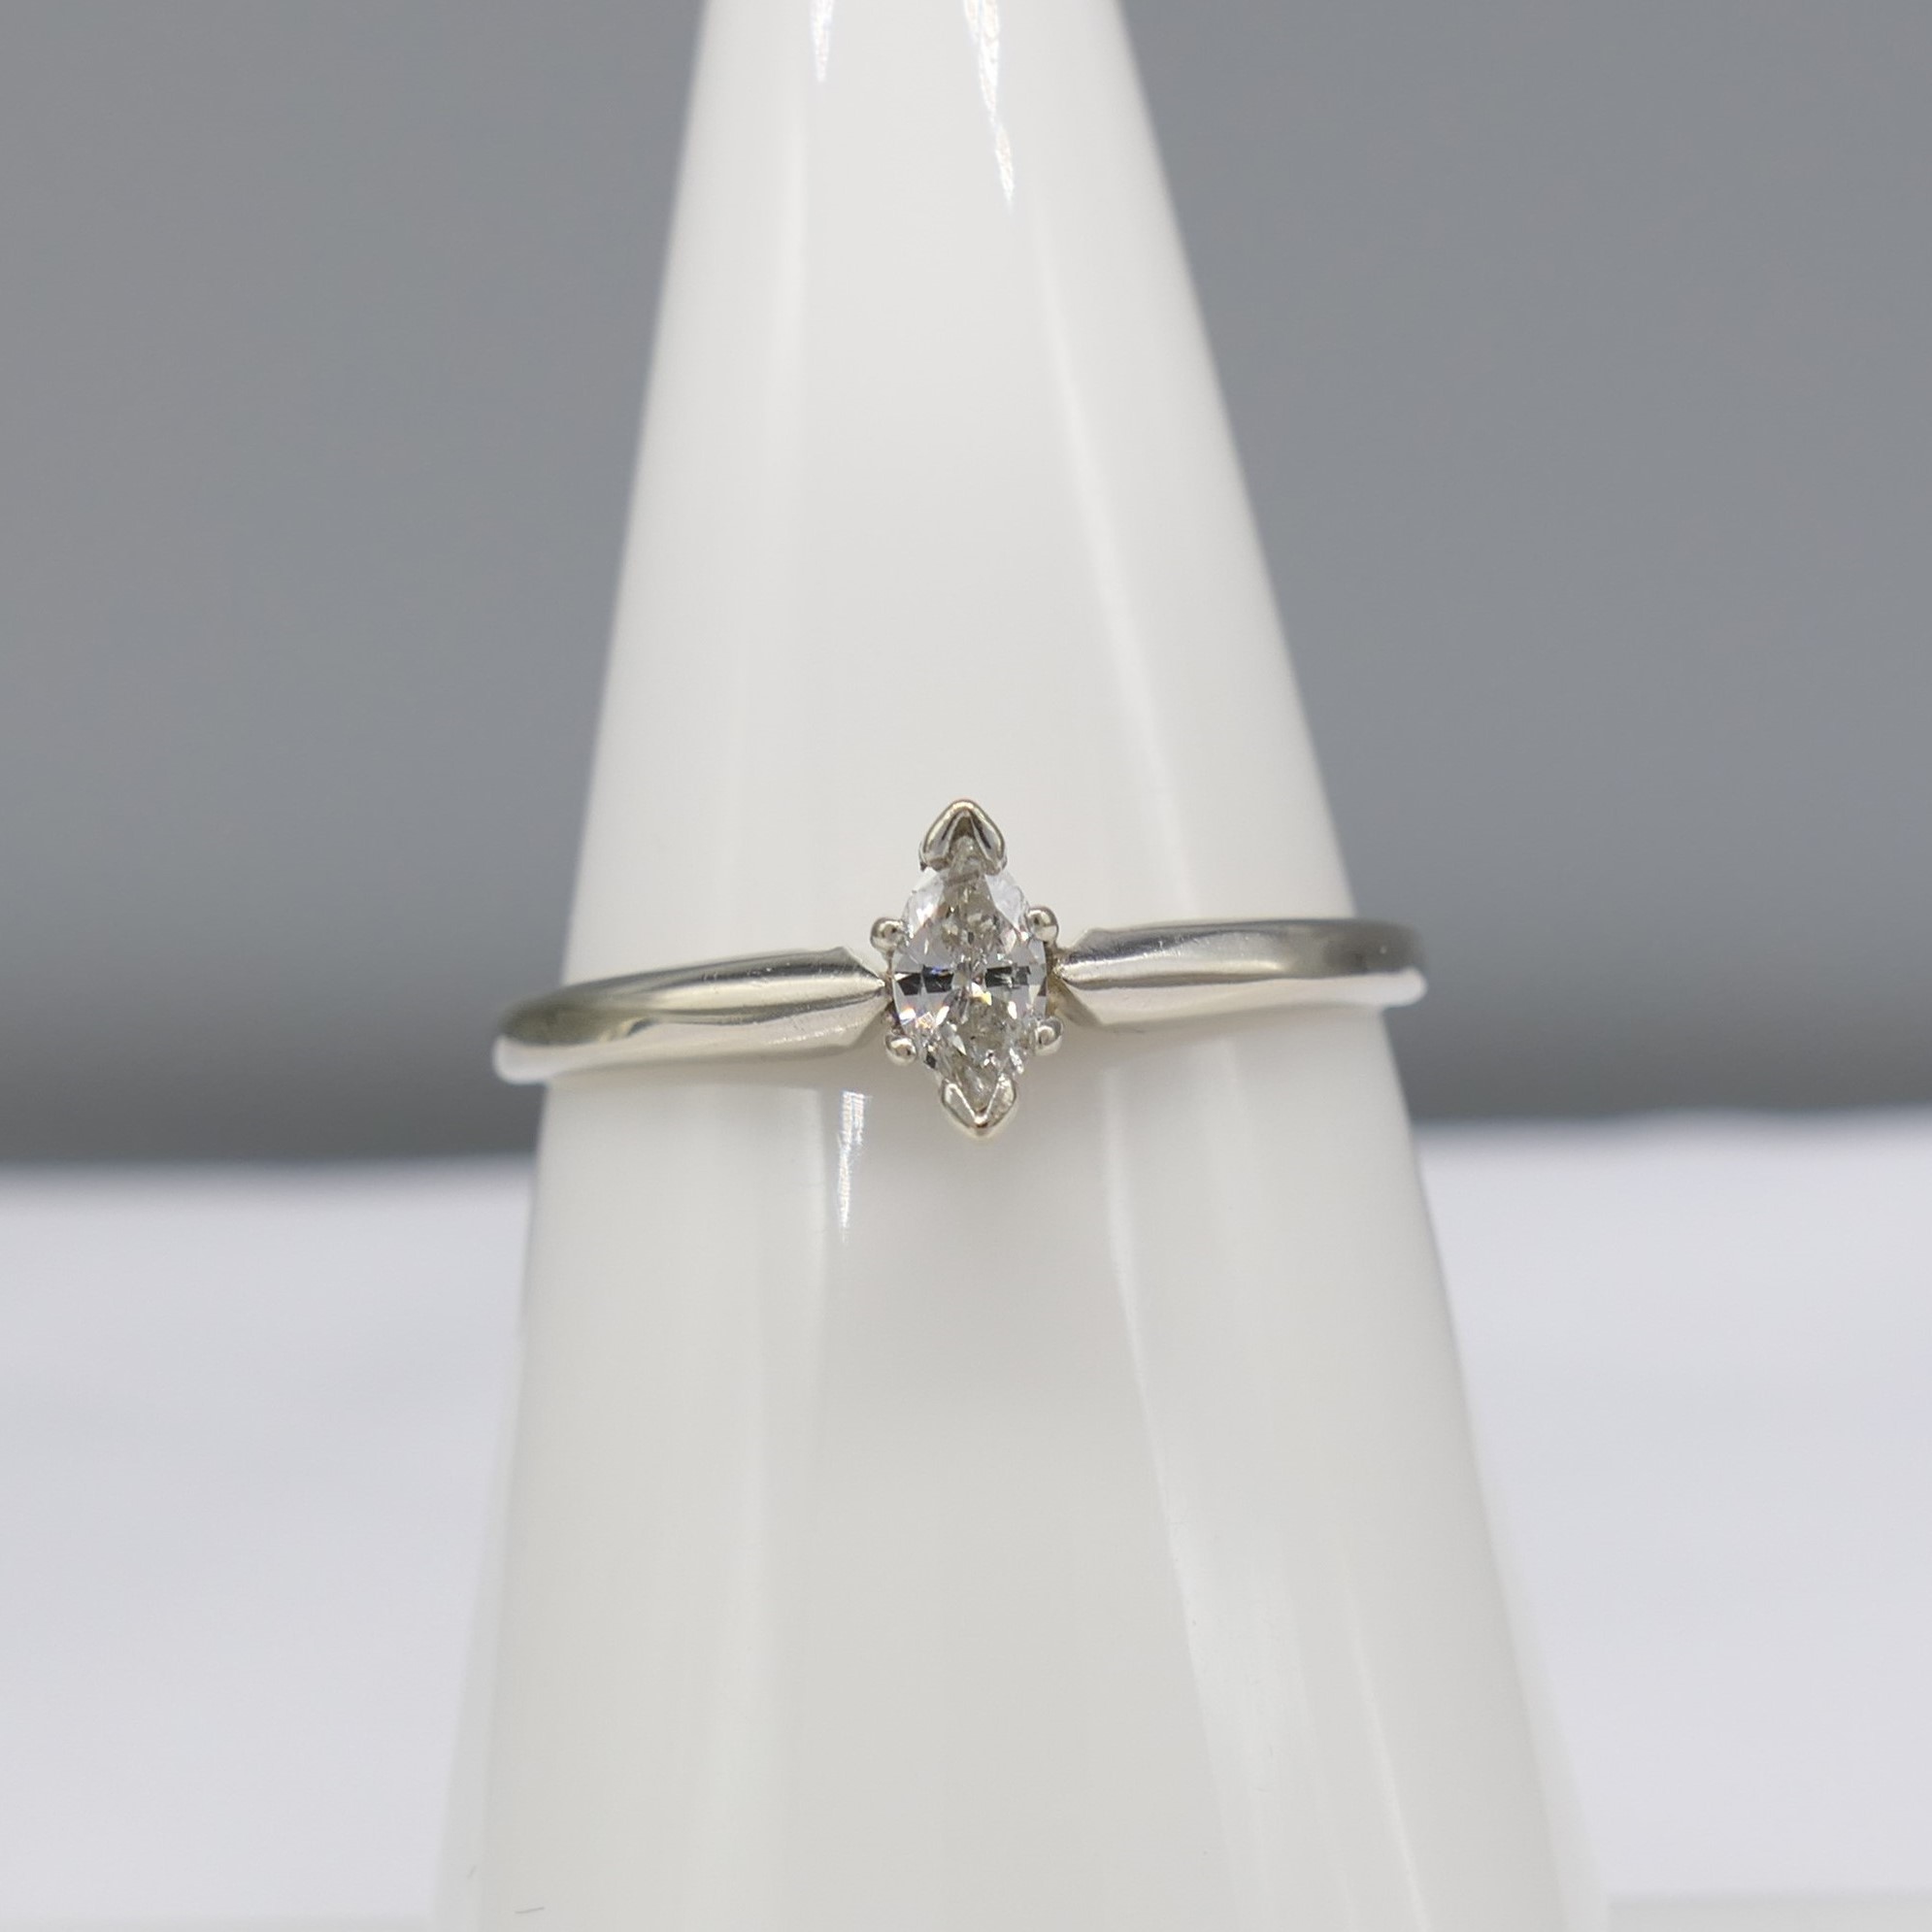 Marquise-cut diamond solitaire ring in 14 carat wh - Image 6 of 6